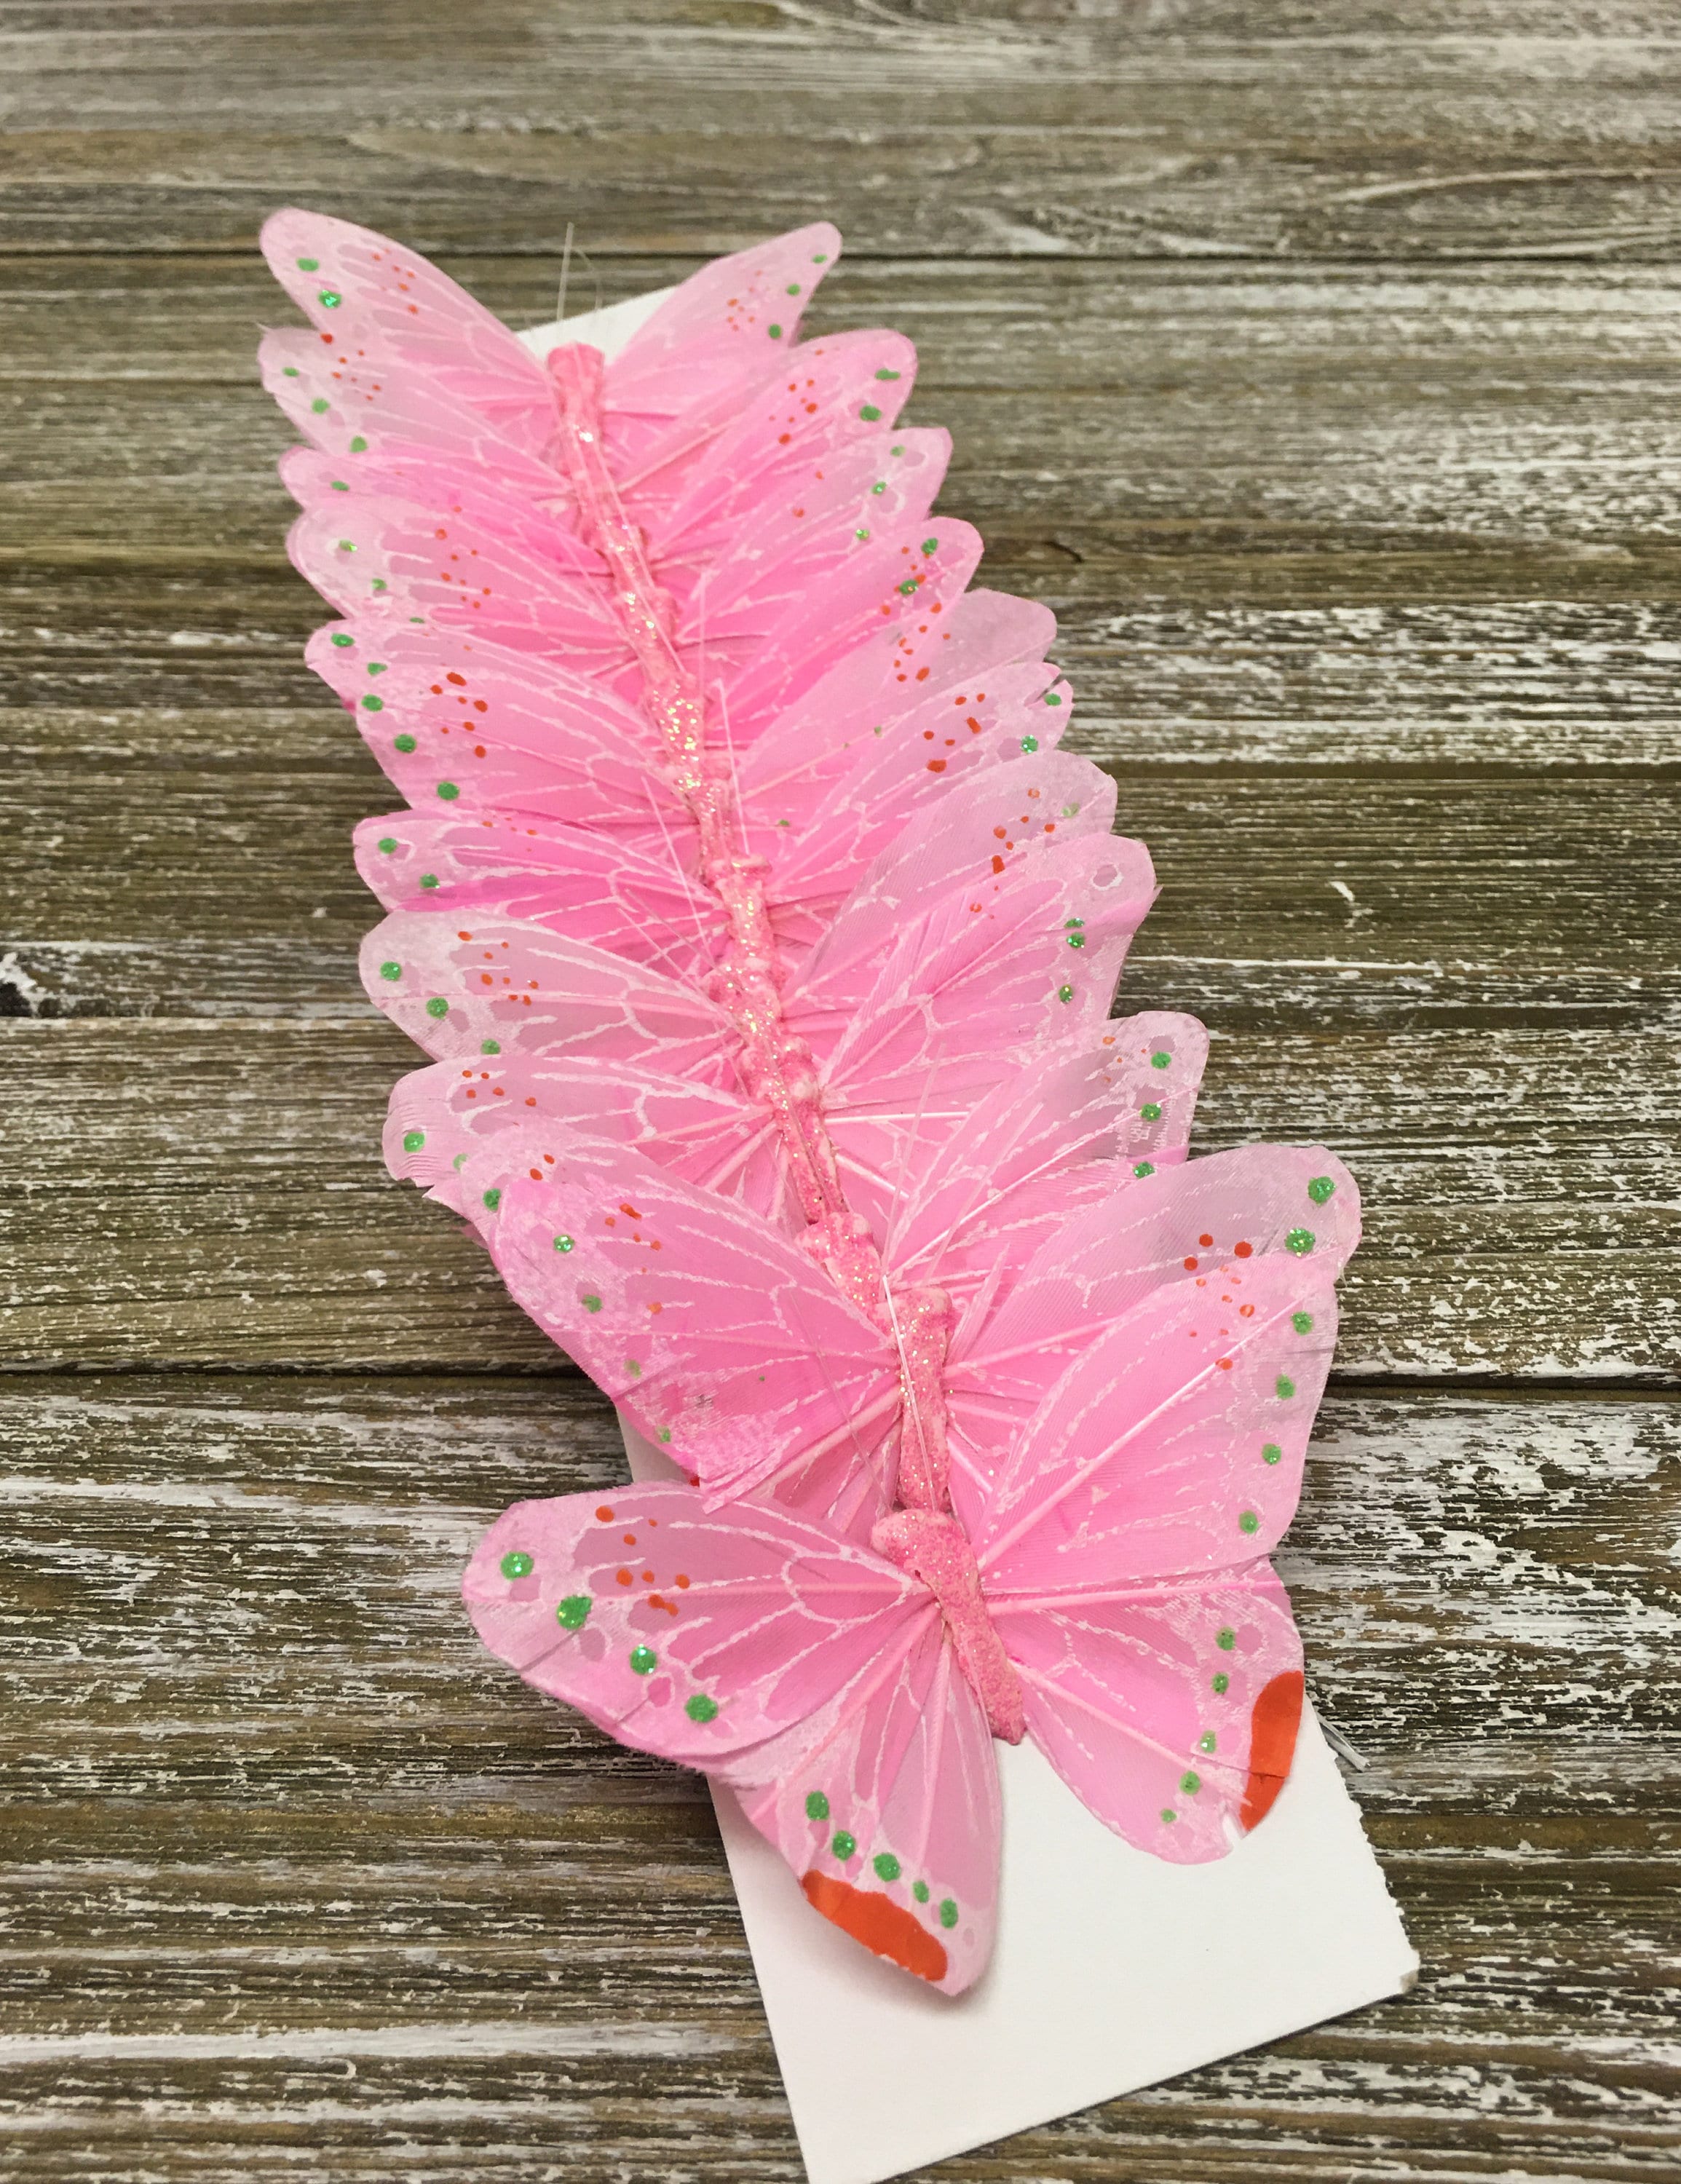 12 Large 7 Monarch Feather Butterflies on Wire for Costumes, Floral Accent,  Crafts, Hats, Home, Garden, Xmas Tree, Cake Topper 